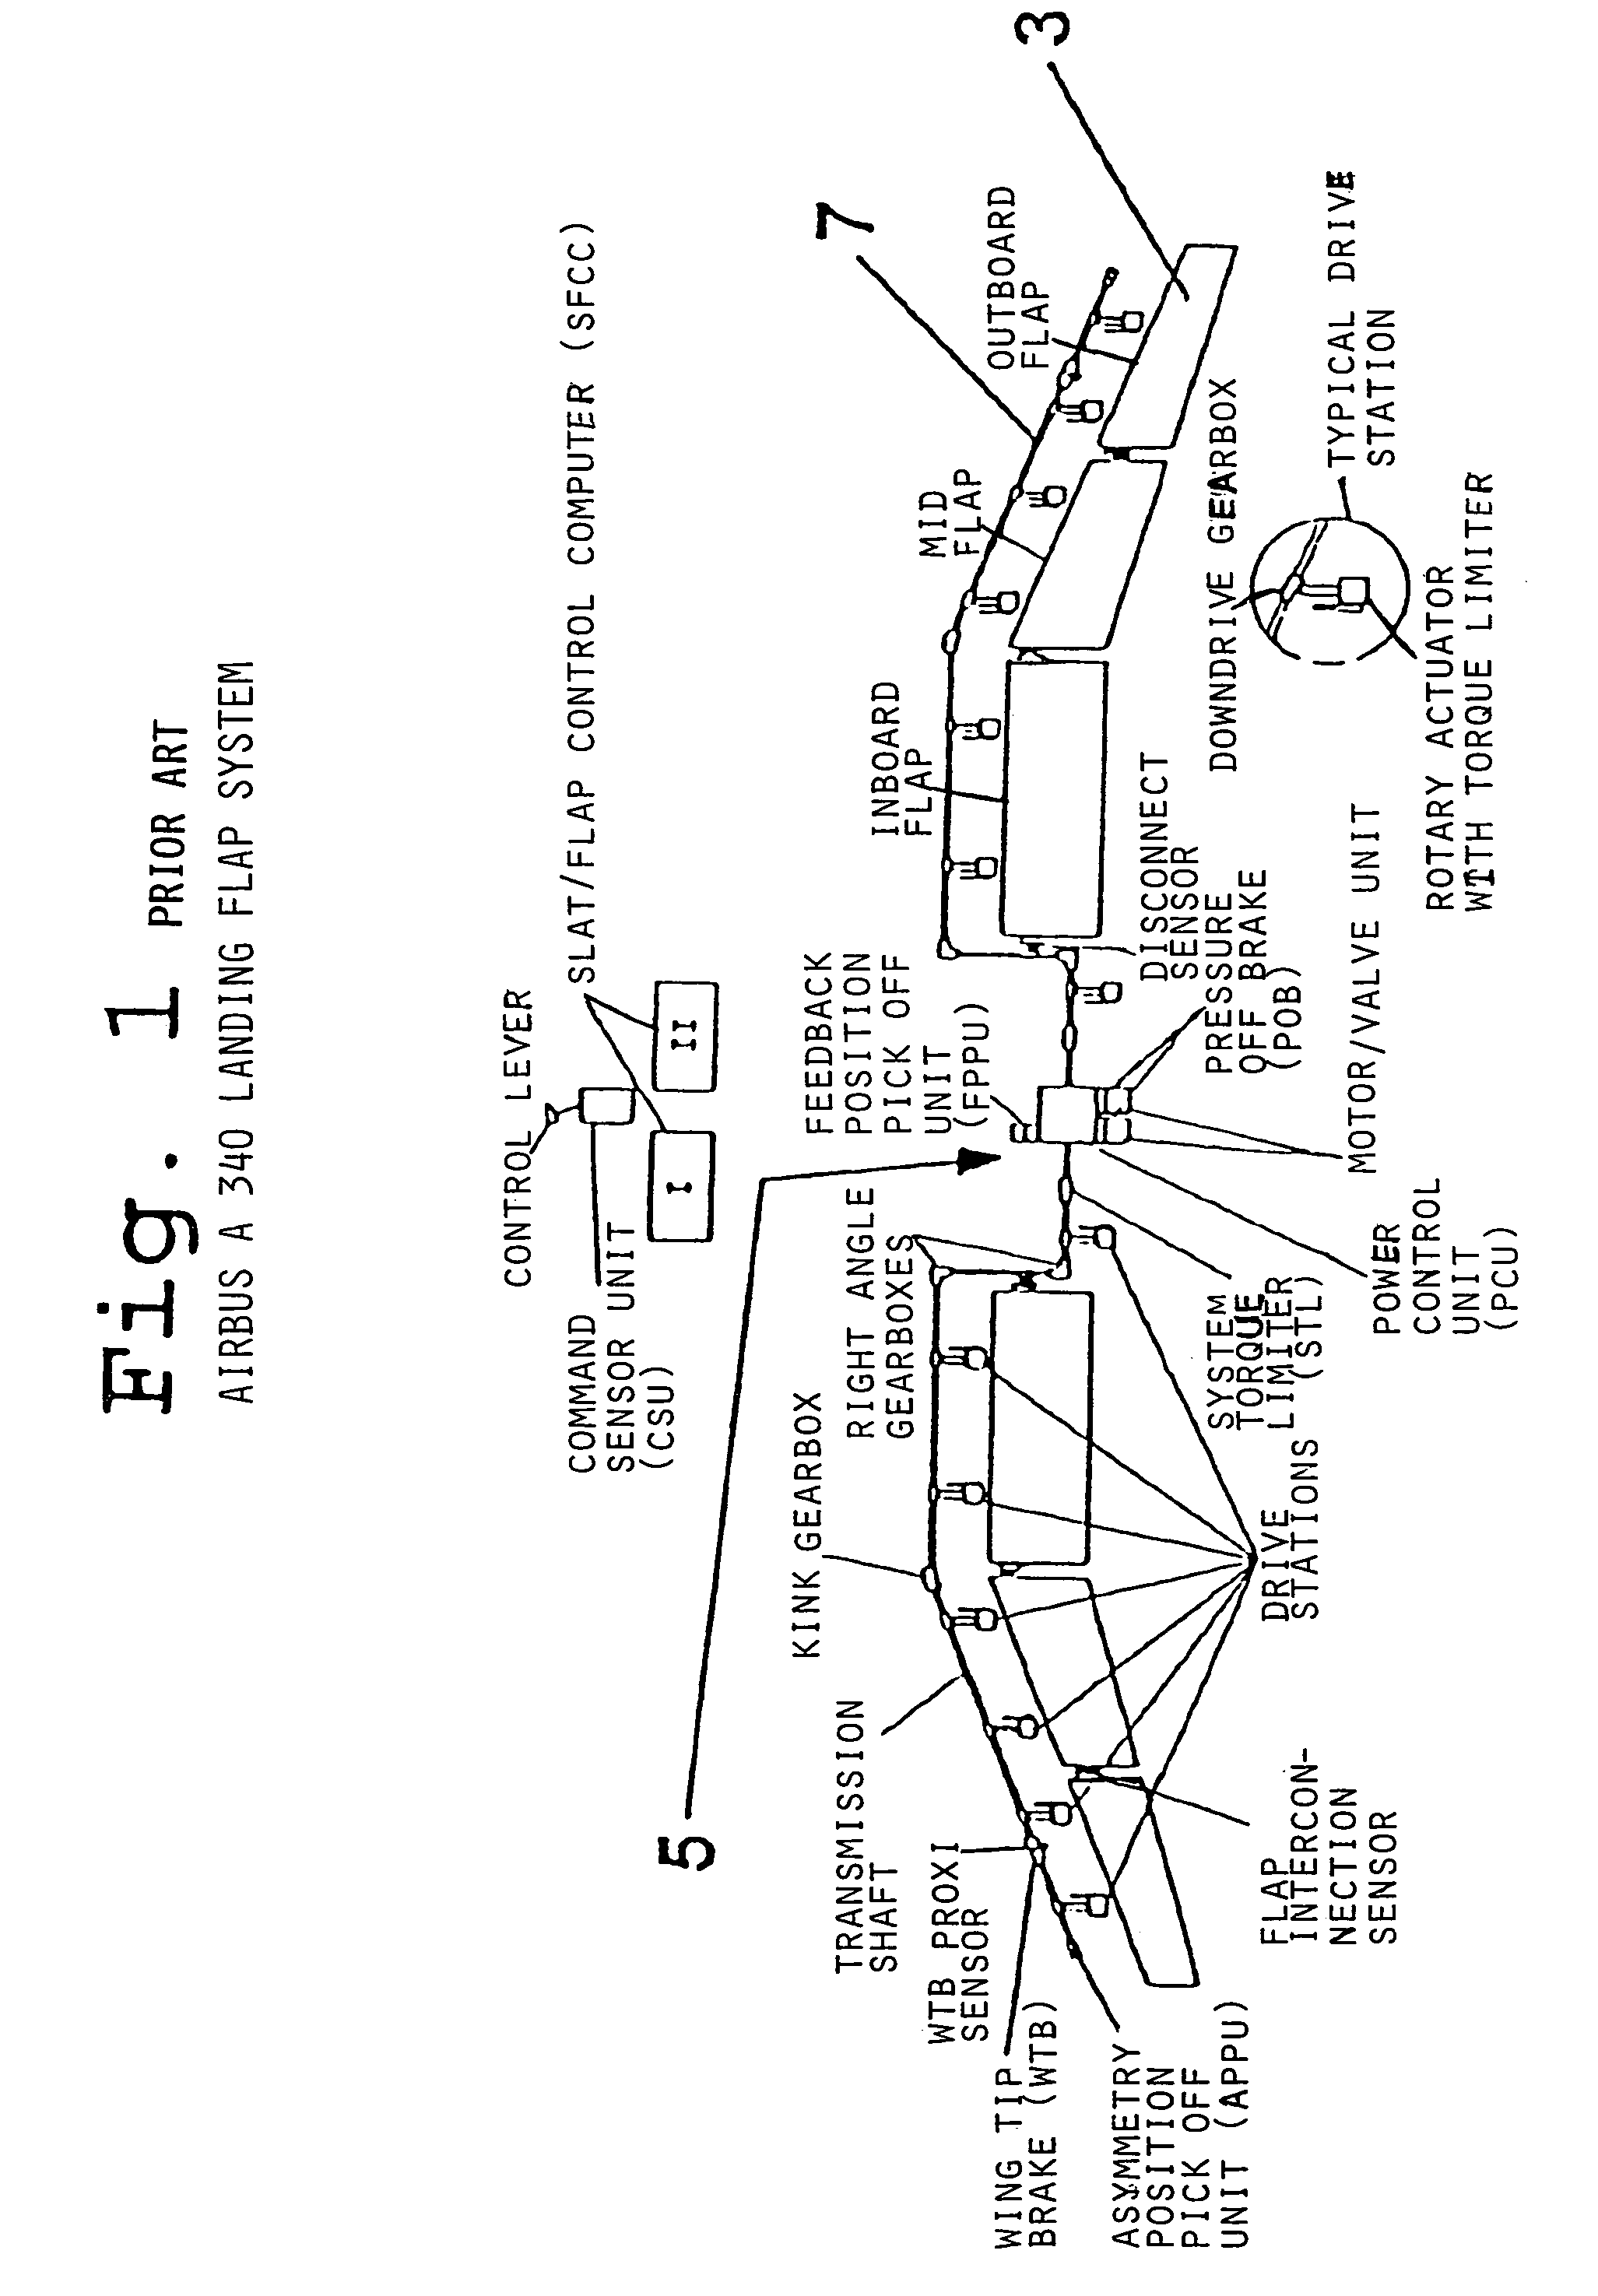 Adaptive flap and slat drive system for aircraft